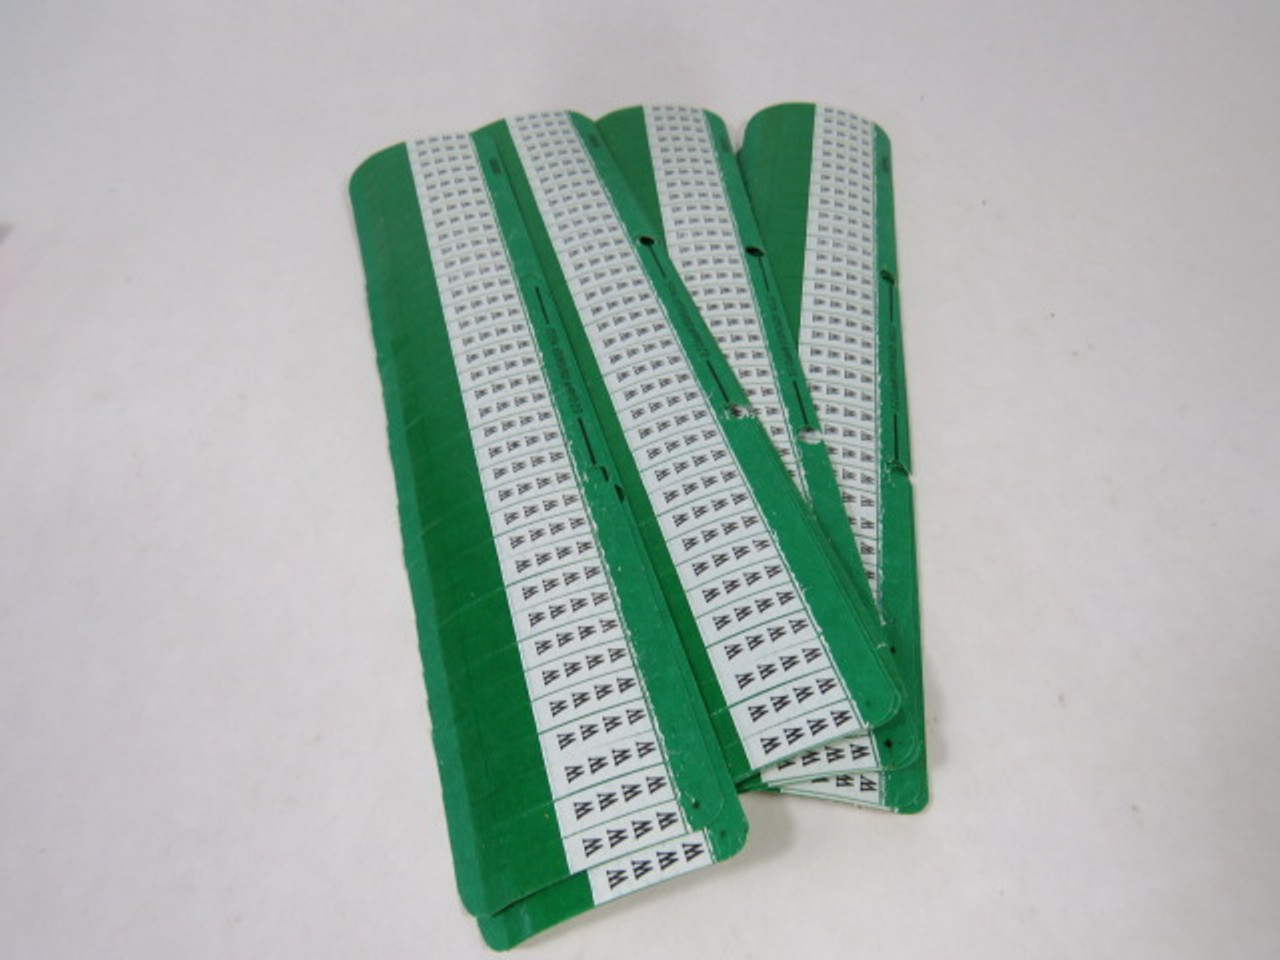 Thomas & Betts W Green E-Z-Code Wire Markers Lot of 9 ! NEW !